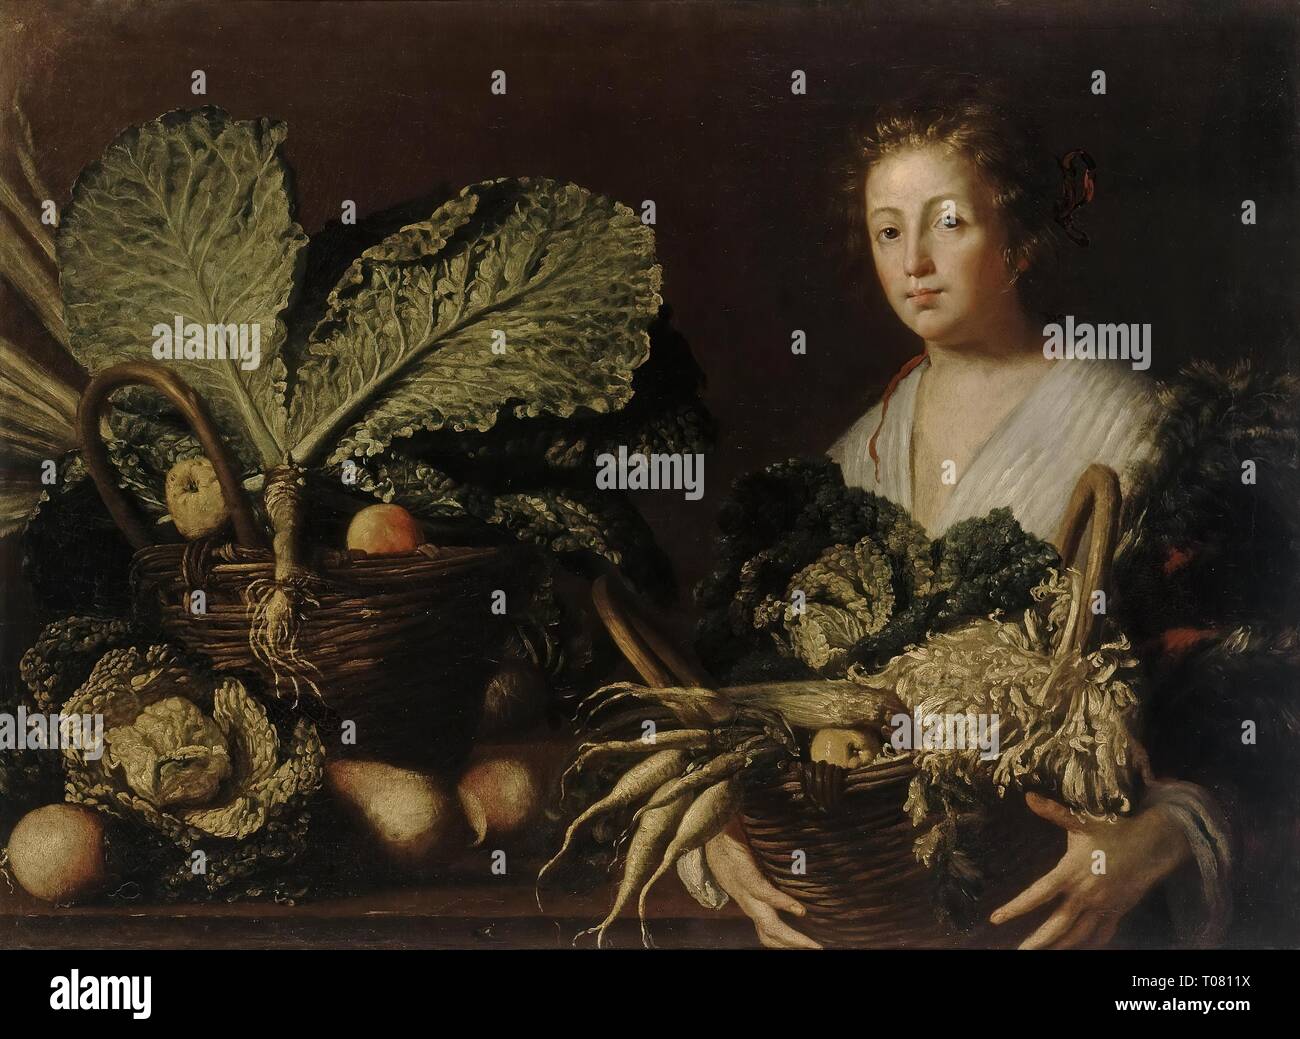 'Woman with Vegetables'. Italy. Dimensions: 100x136 cm. Museum: State Hermitage, St. Petersburg. Author: Strozzi, Bernardo (Il Cappuccino, Il Prete Genovese) (circle of). Stock Photo